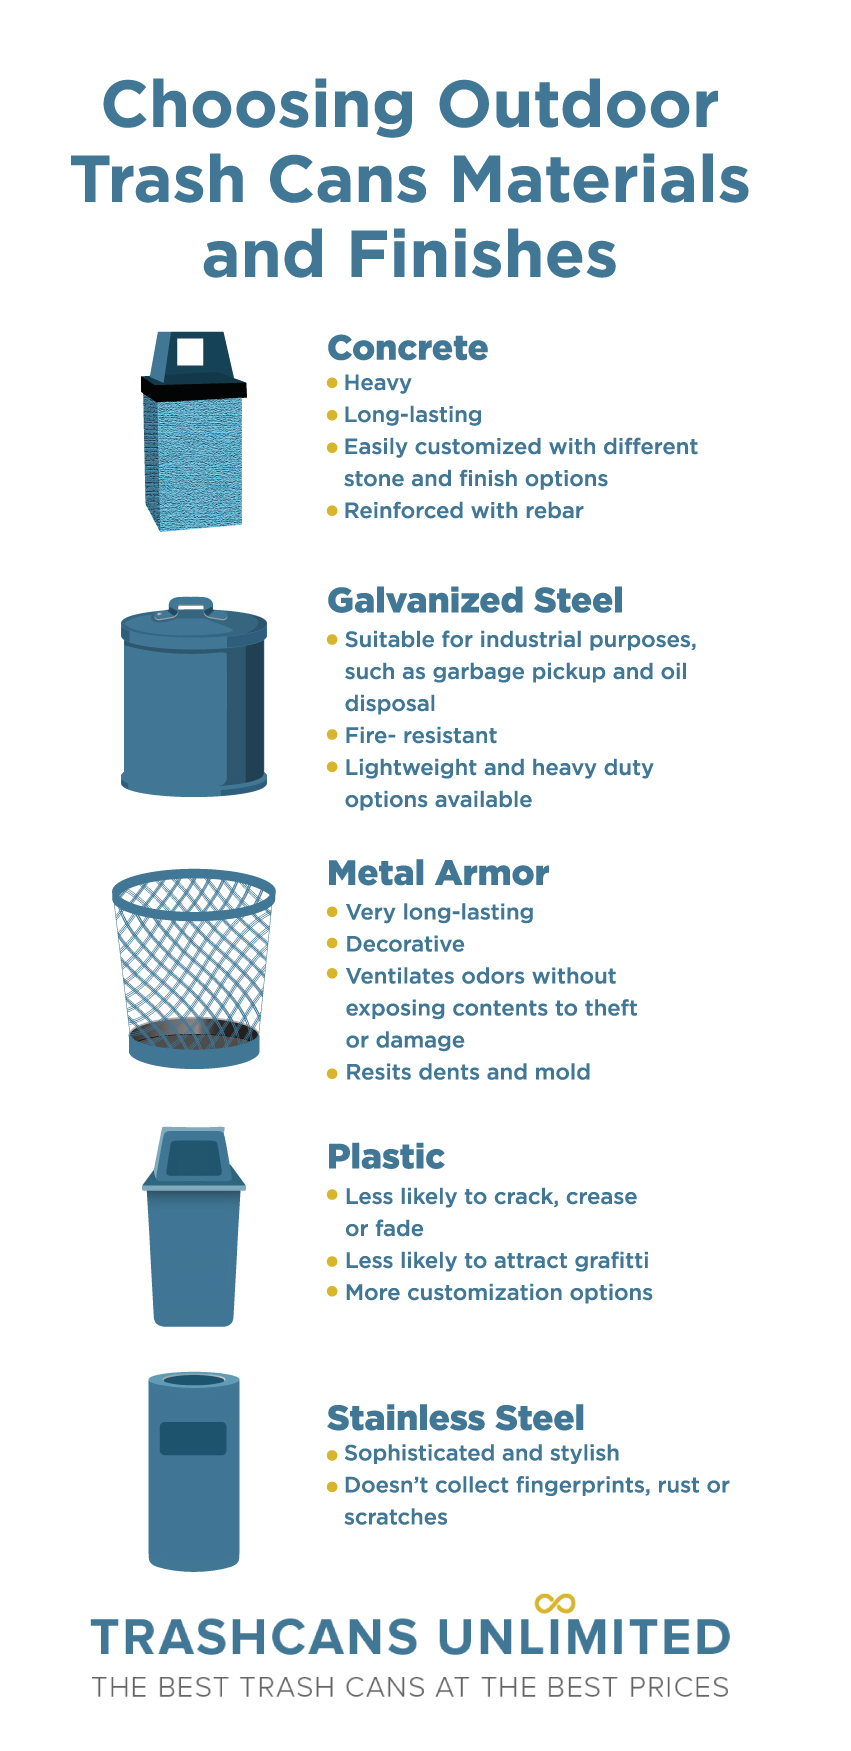 https://cdn11.bigcommerce.com/s-xjktrxdn/product_images/uploaded_images/infographic-1-choosing-outdoor-trashcans.jpg